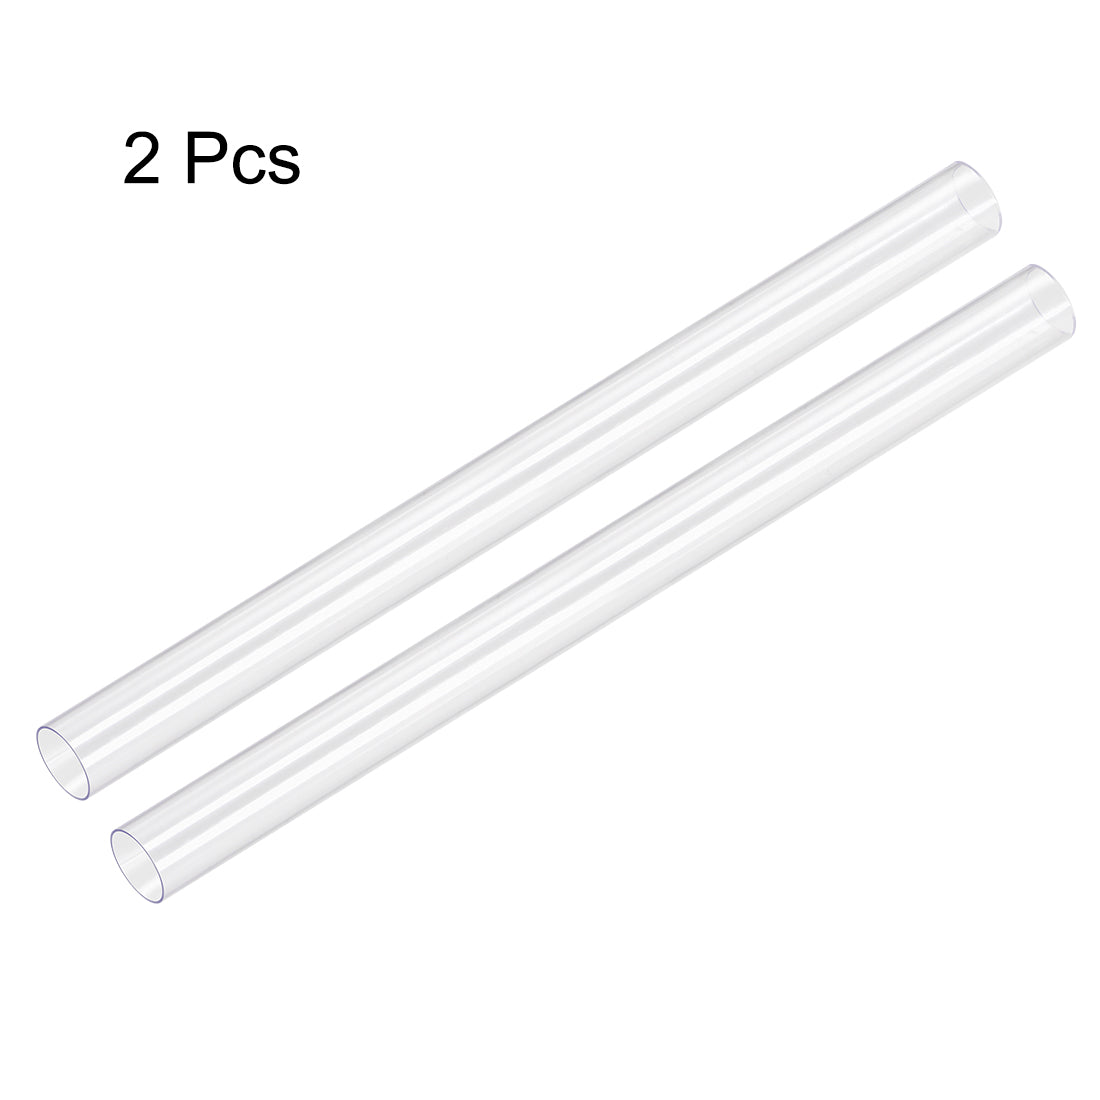 uxcell Uxcell PVC Rigid Round Tubing,Clear,30mm ID x 32mm OD,0.5M/1.64Ft Length,2pcs